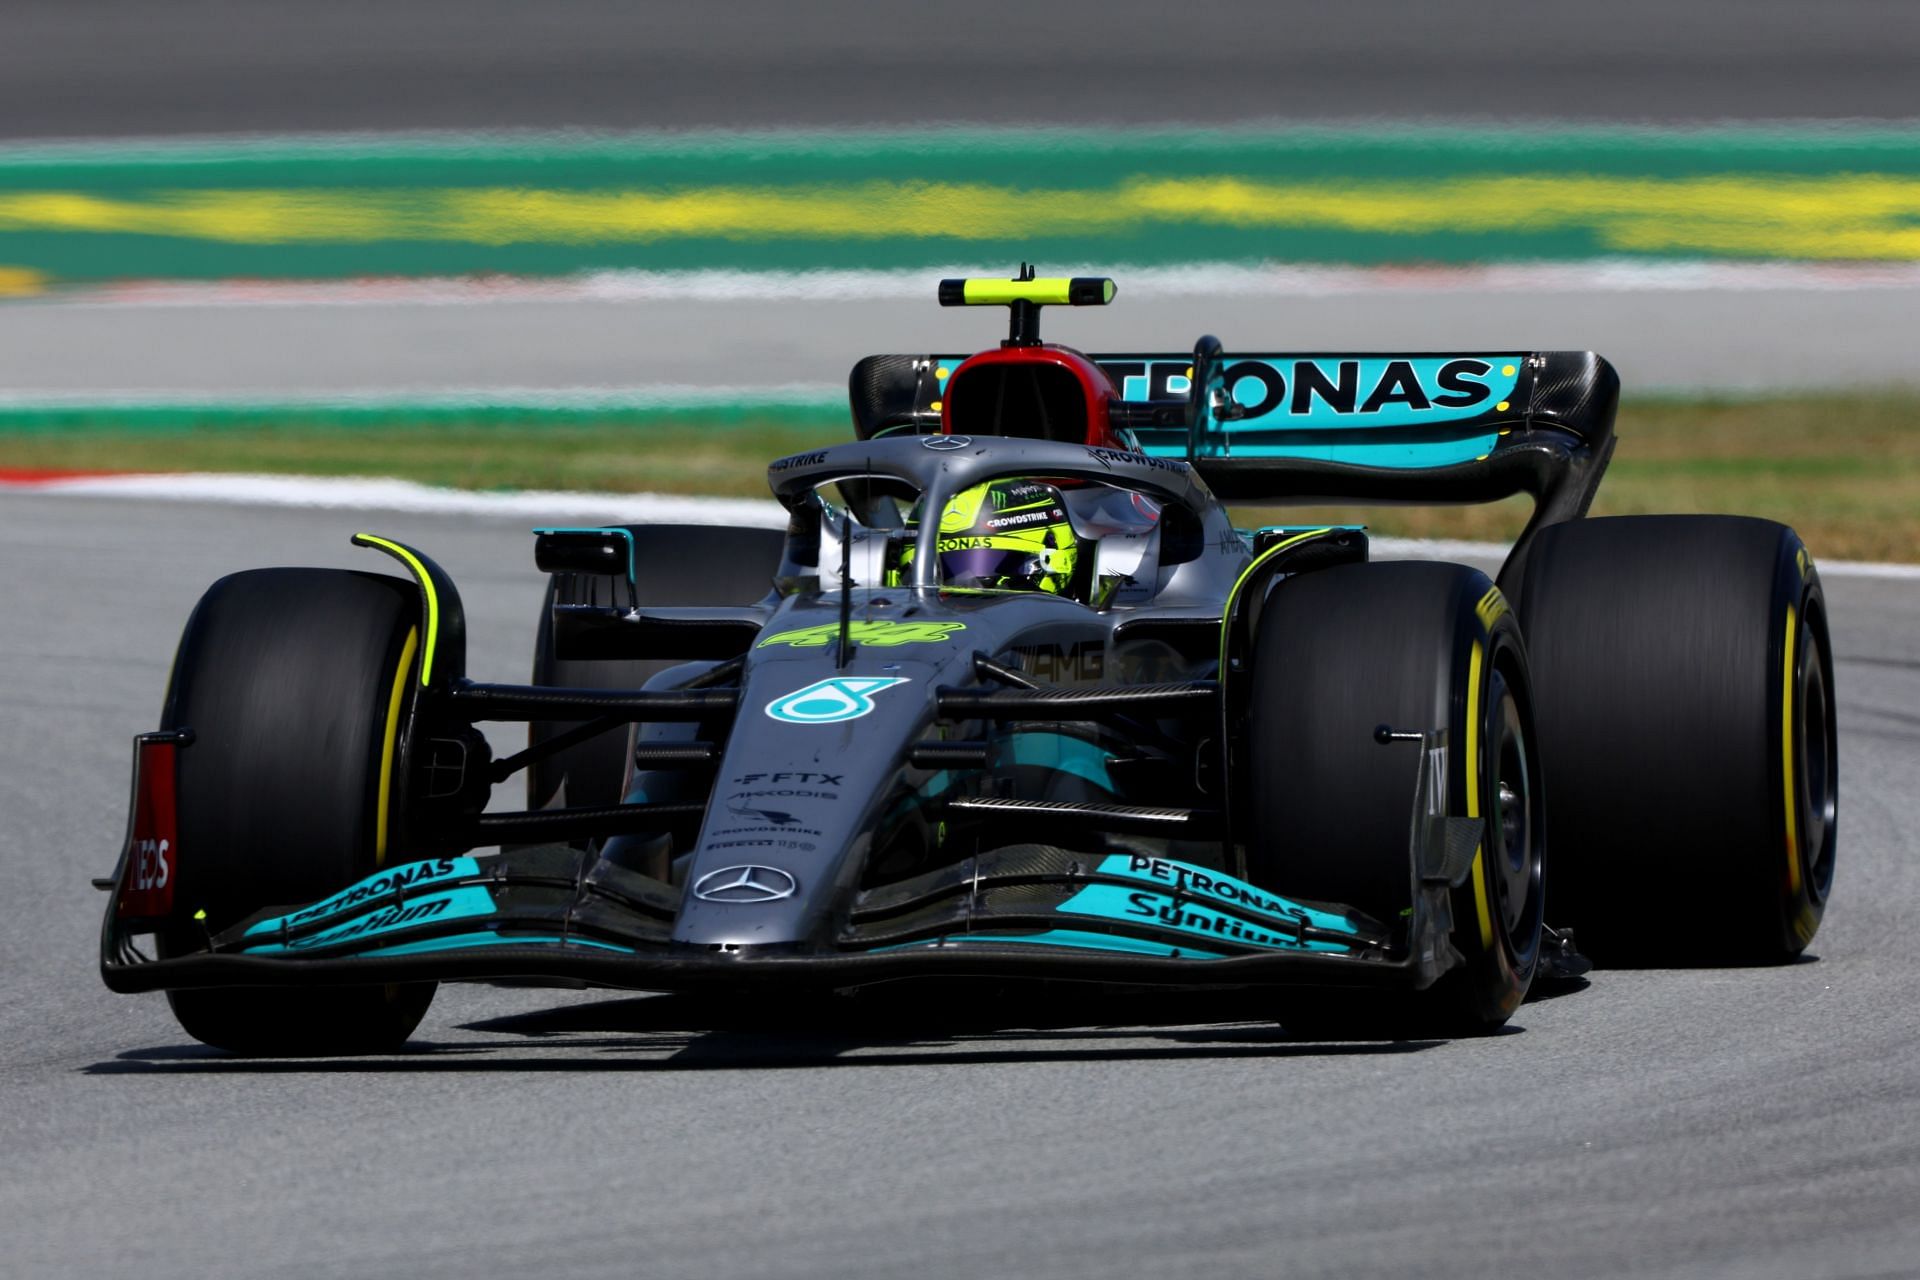 Lewis Hamilton managed a stellar recovery drive at the 2022 Spanish GP to take a solid P5 finish